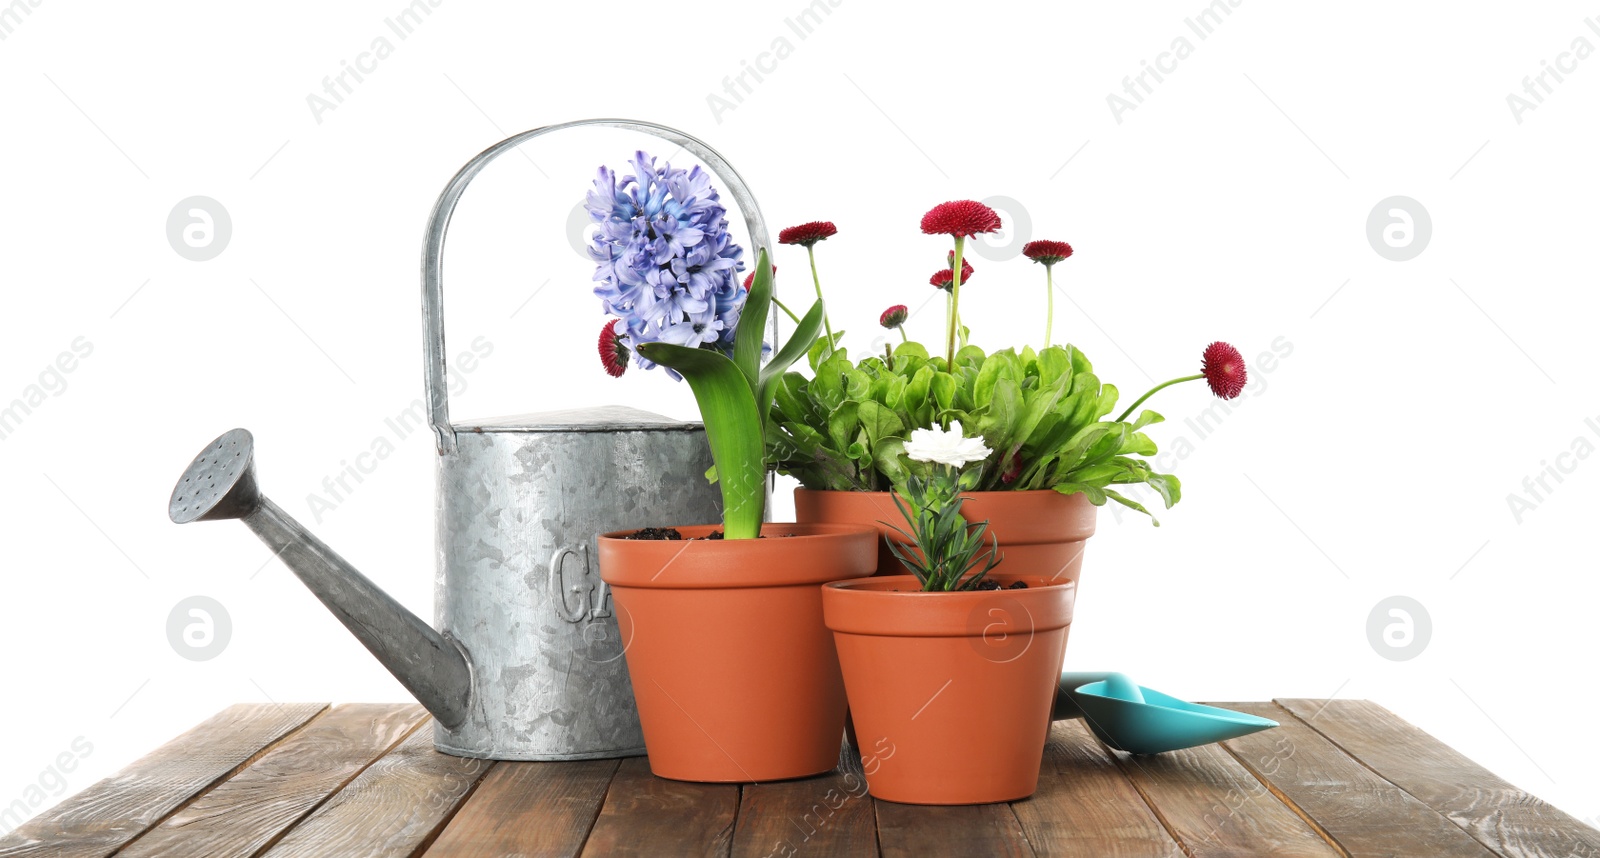 Photo of Potted blooming flowers and gardening equipment on wooden table against white background